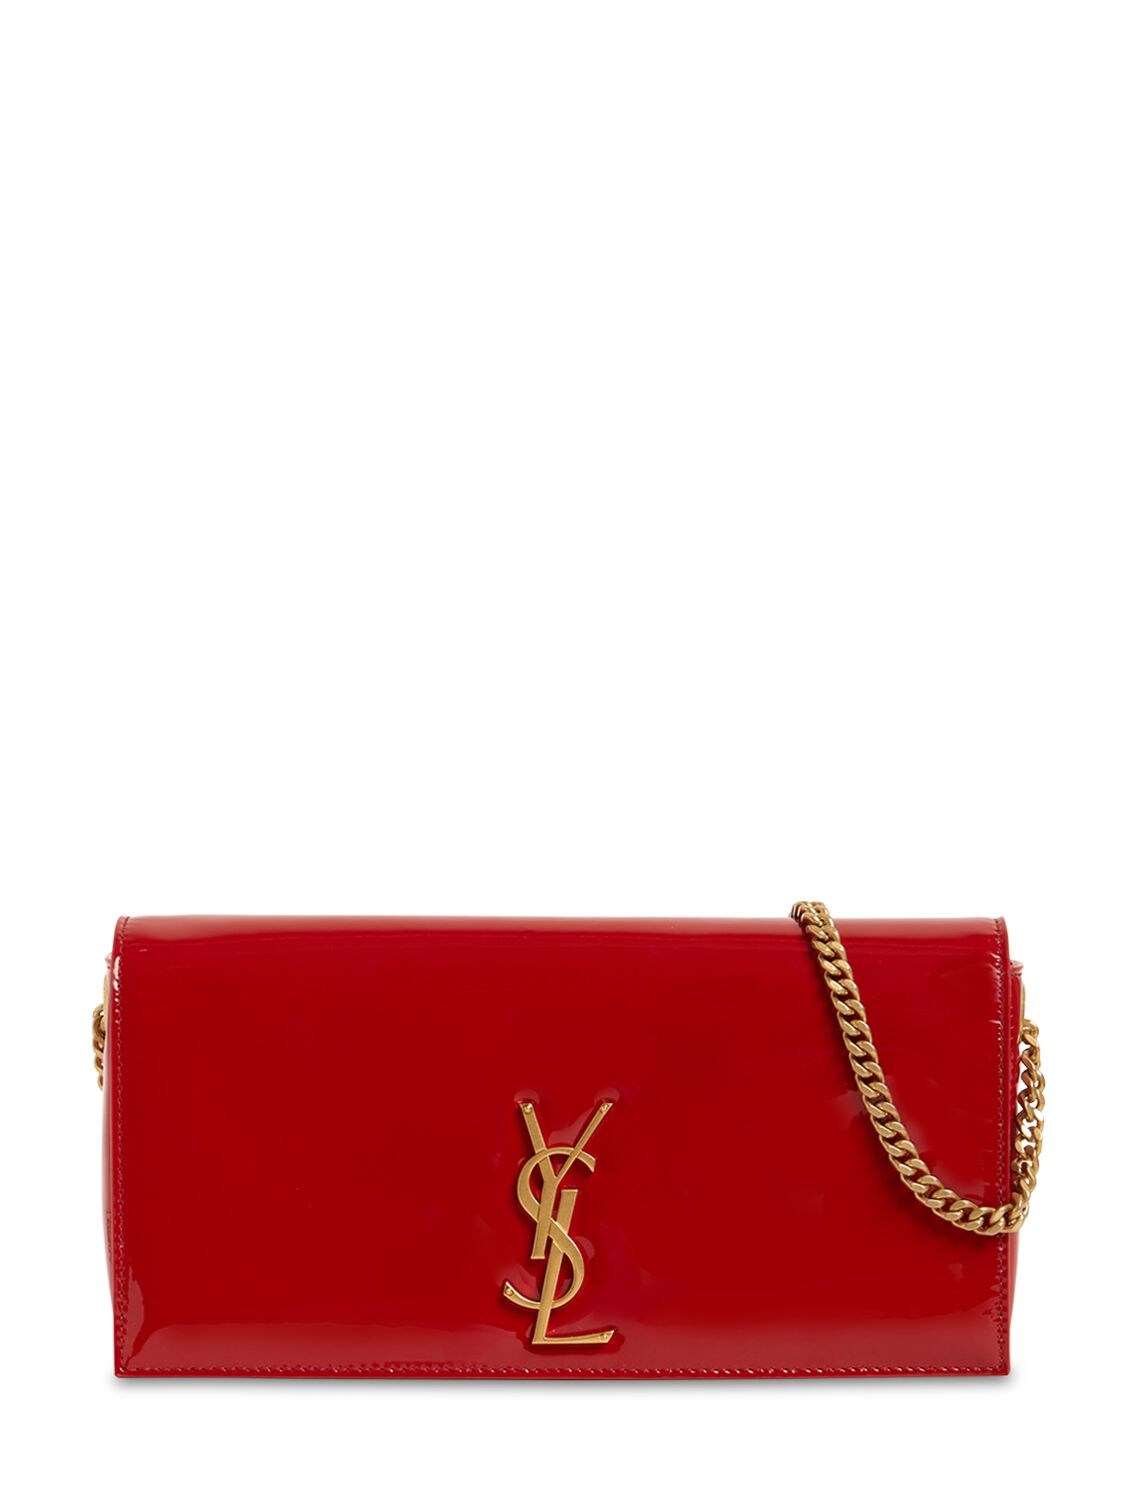 Saint Laurent Kate 99 Baguette Patent Leather Bag In Red